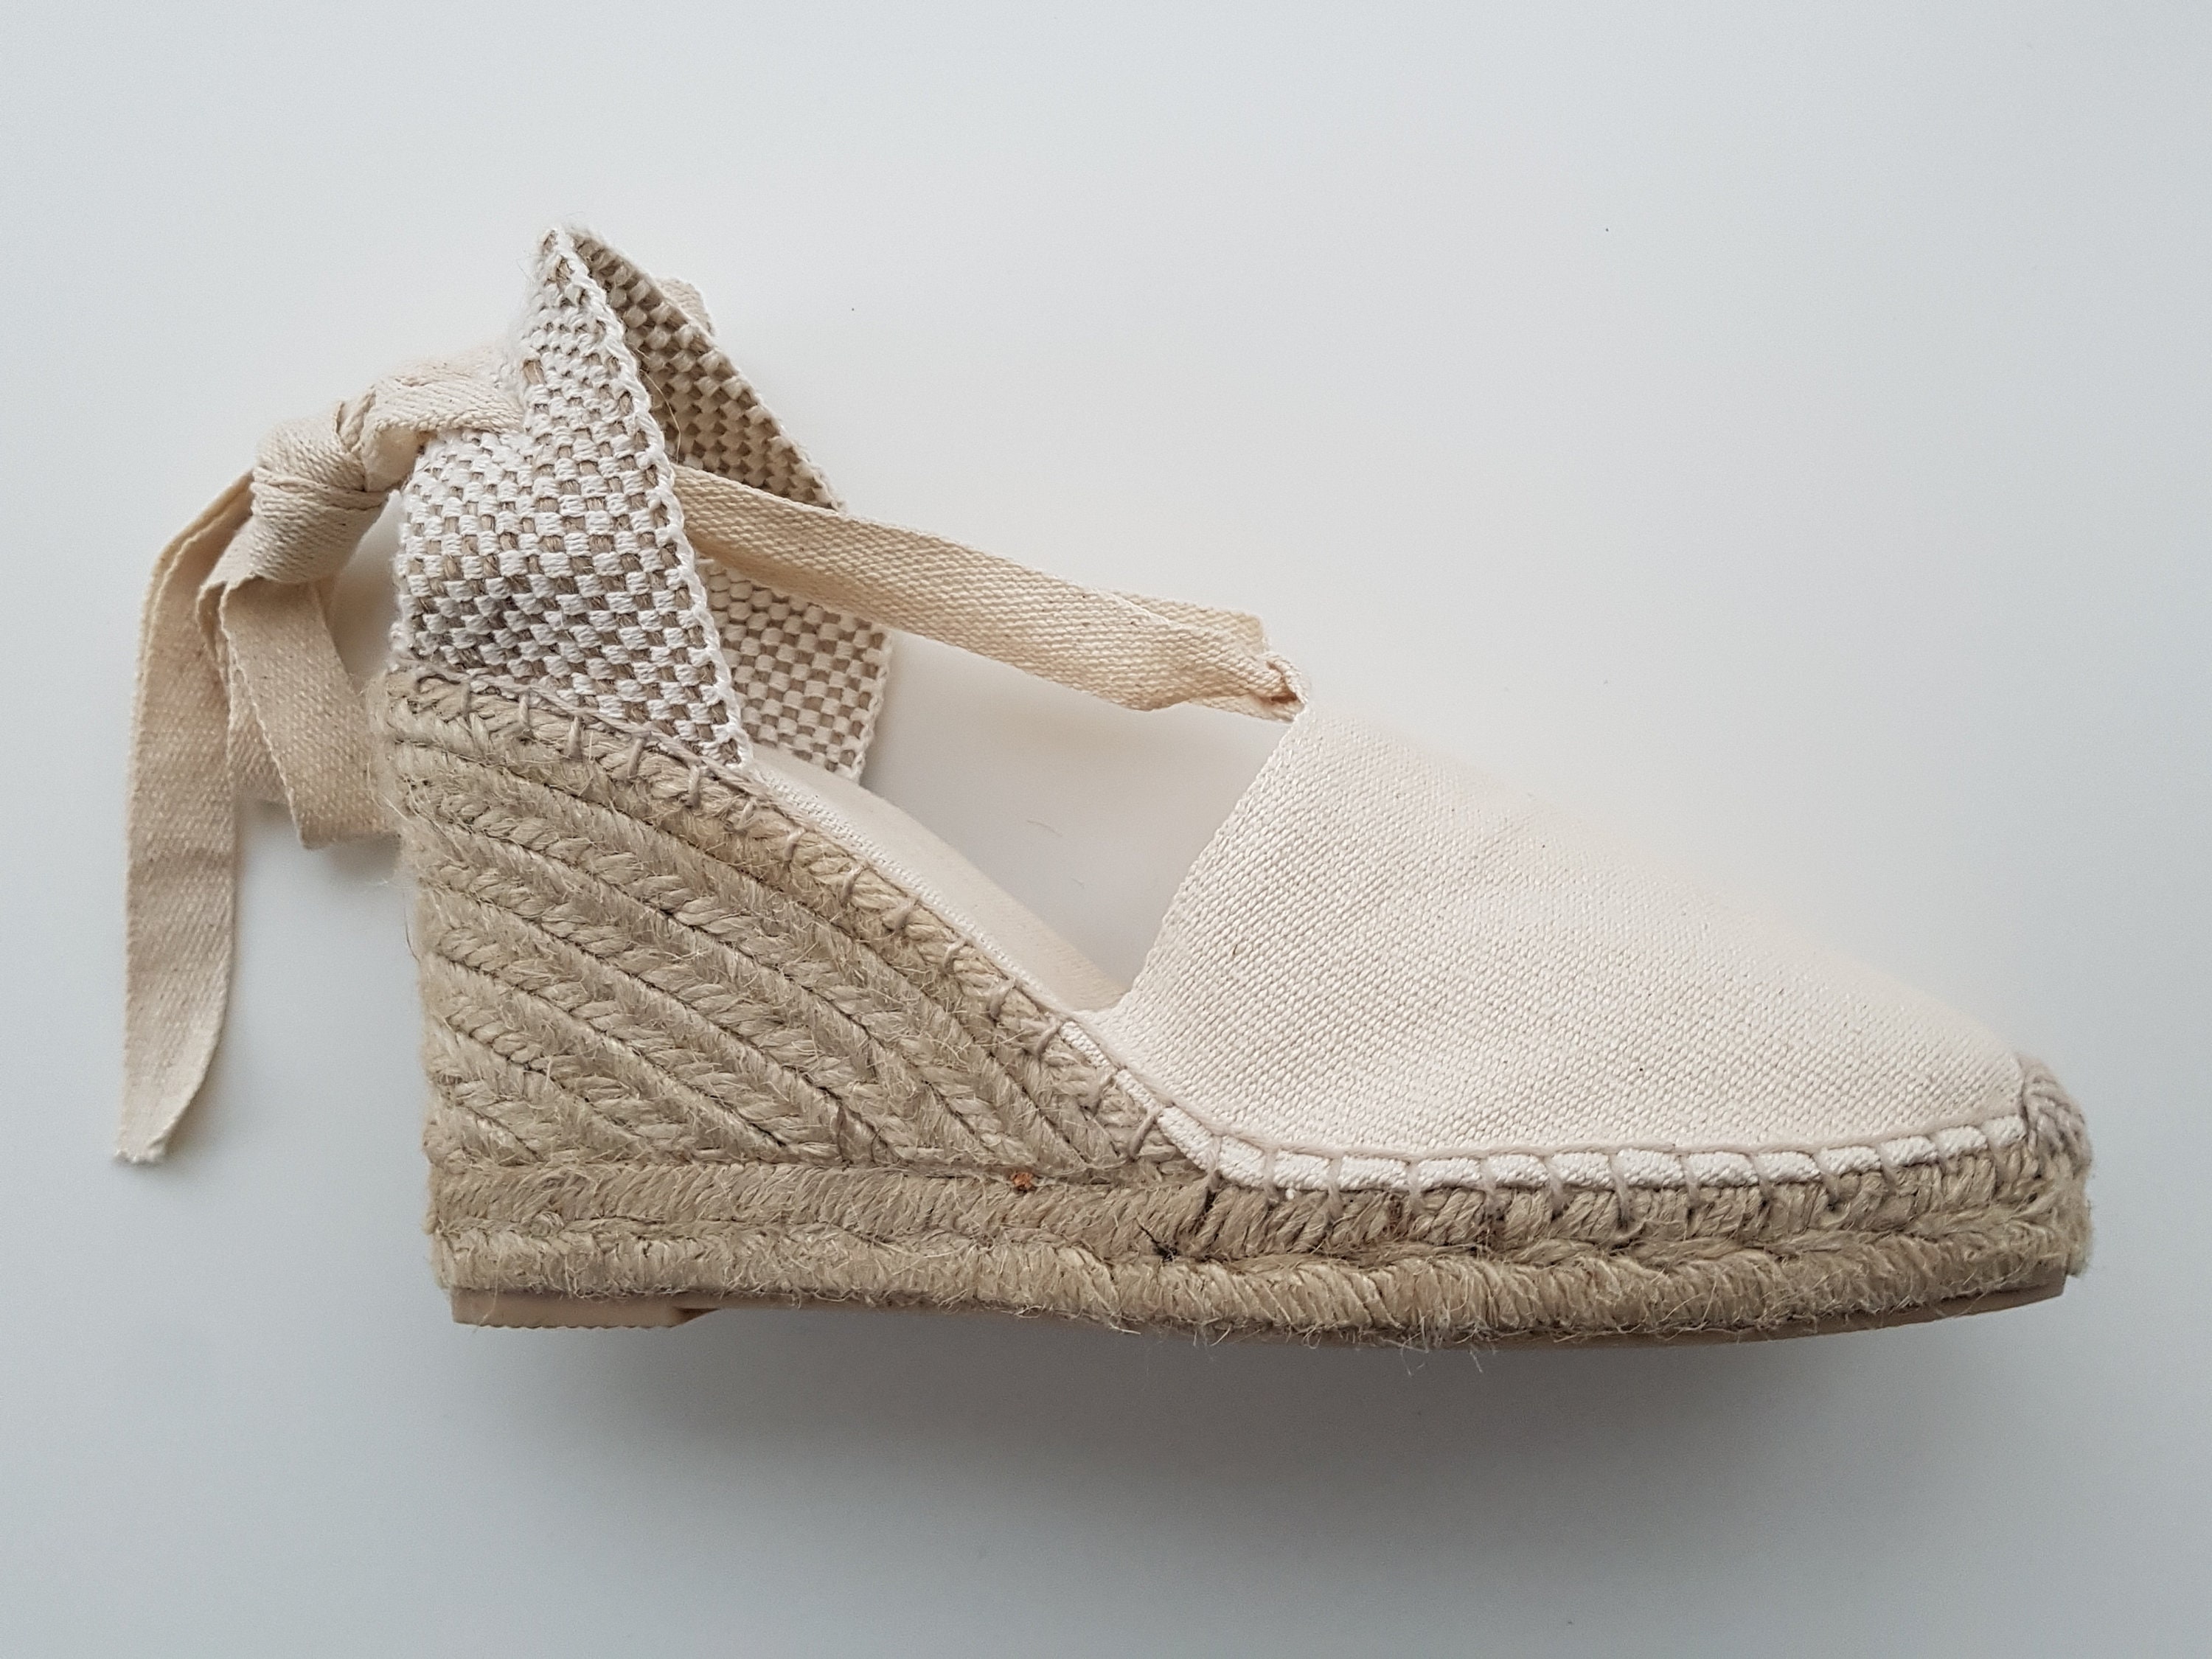 Lace Up espadrille shoes - high heel wedges - VISIBLE SEAM / IVORY ...